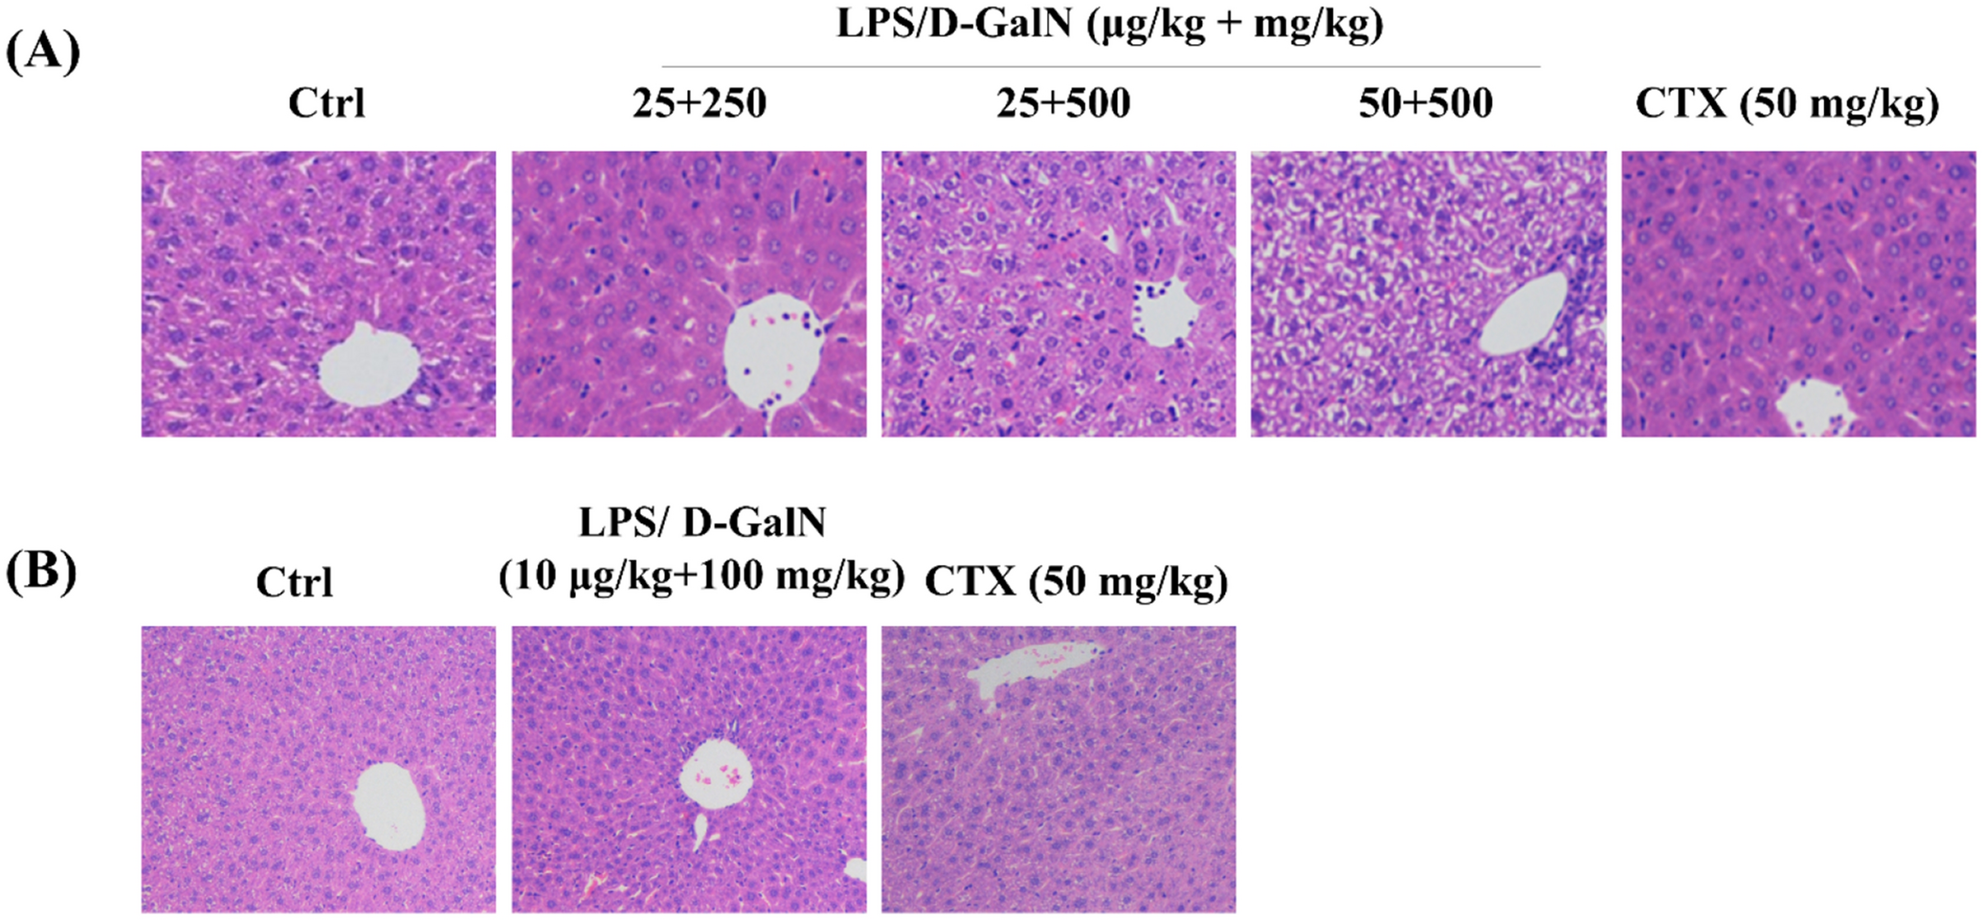 Co-administration of lipopolysaccharide and d-galactosamine induces  genotoxicity in mouse liver | Scientific Reports